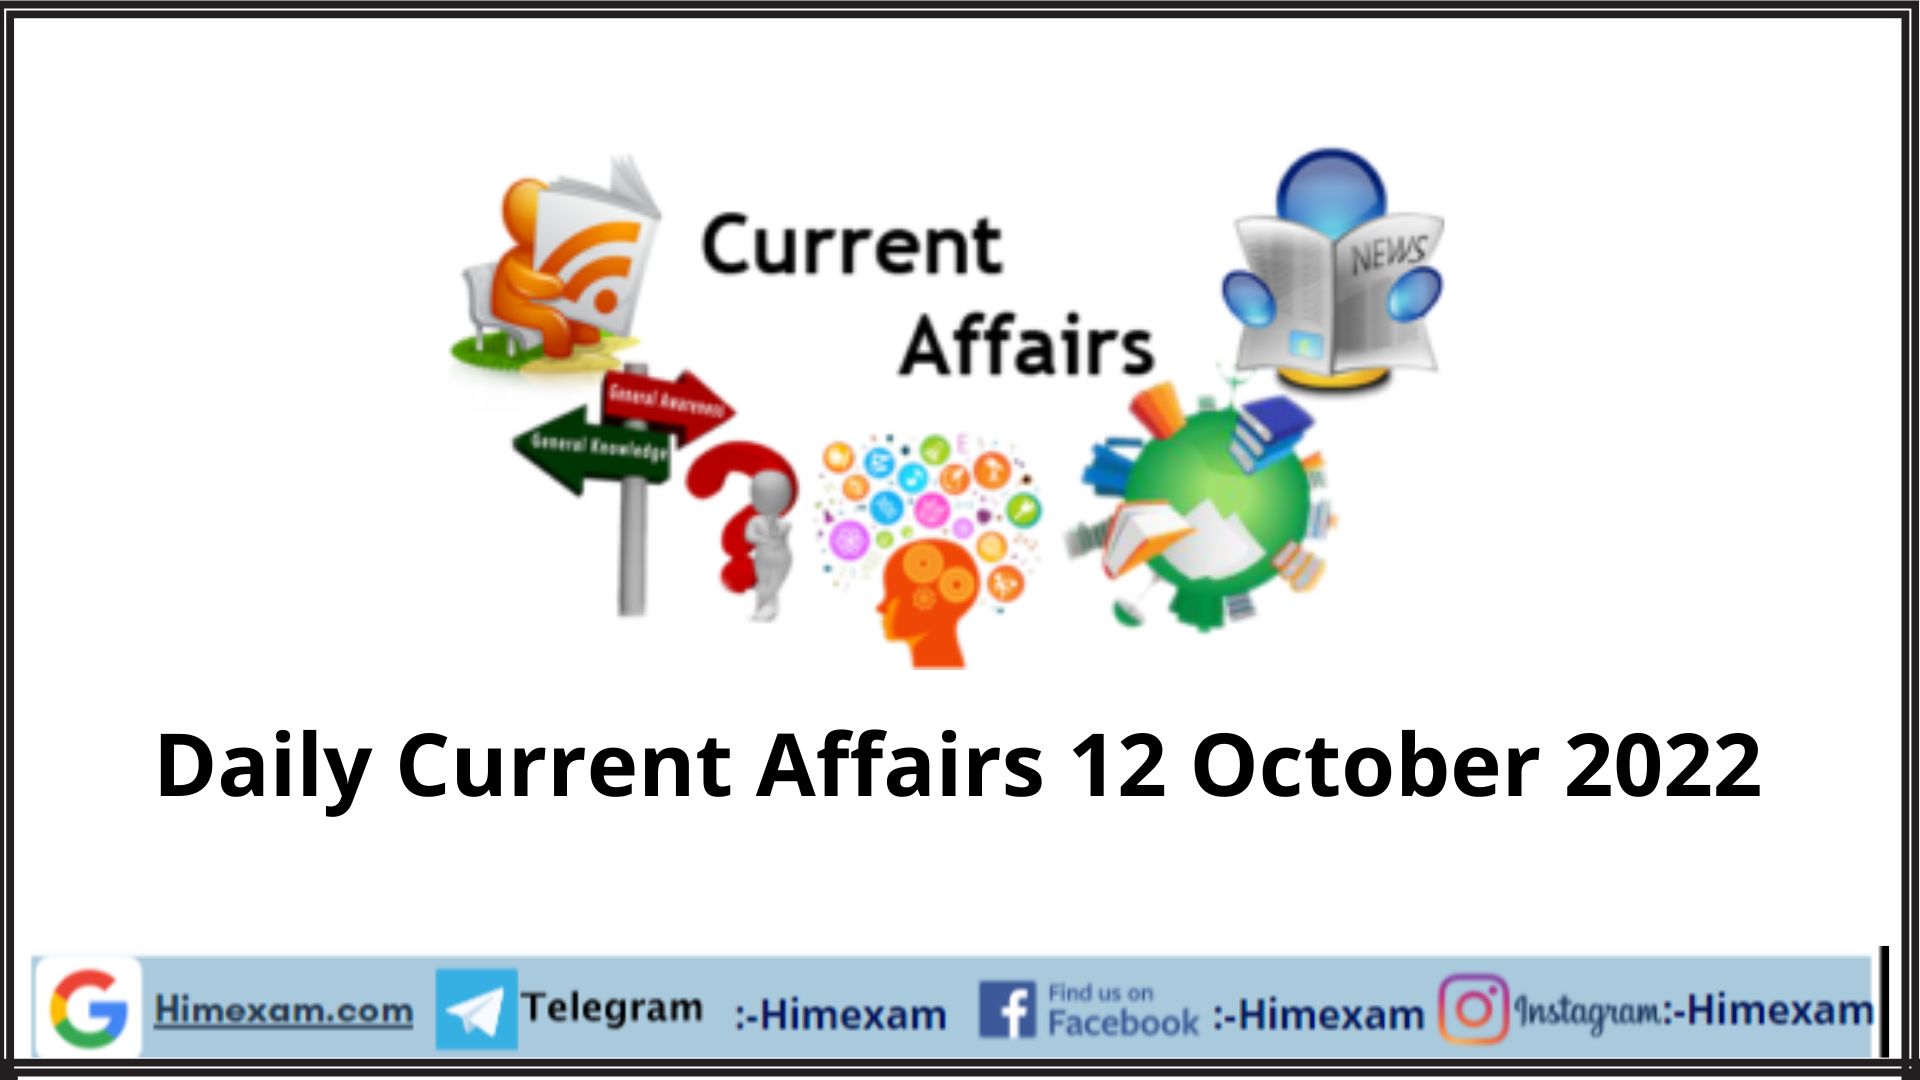 Daily Current Affairs 12 October 2022